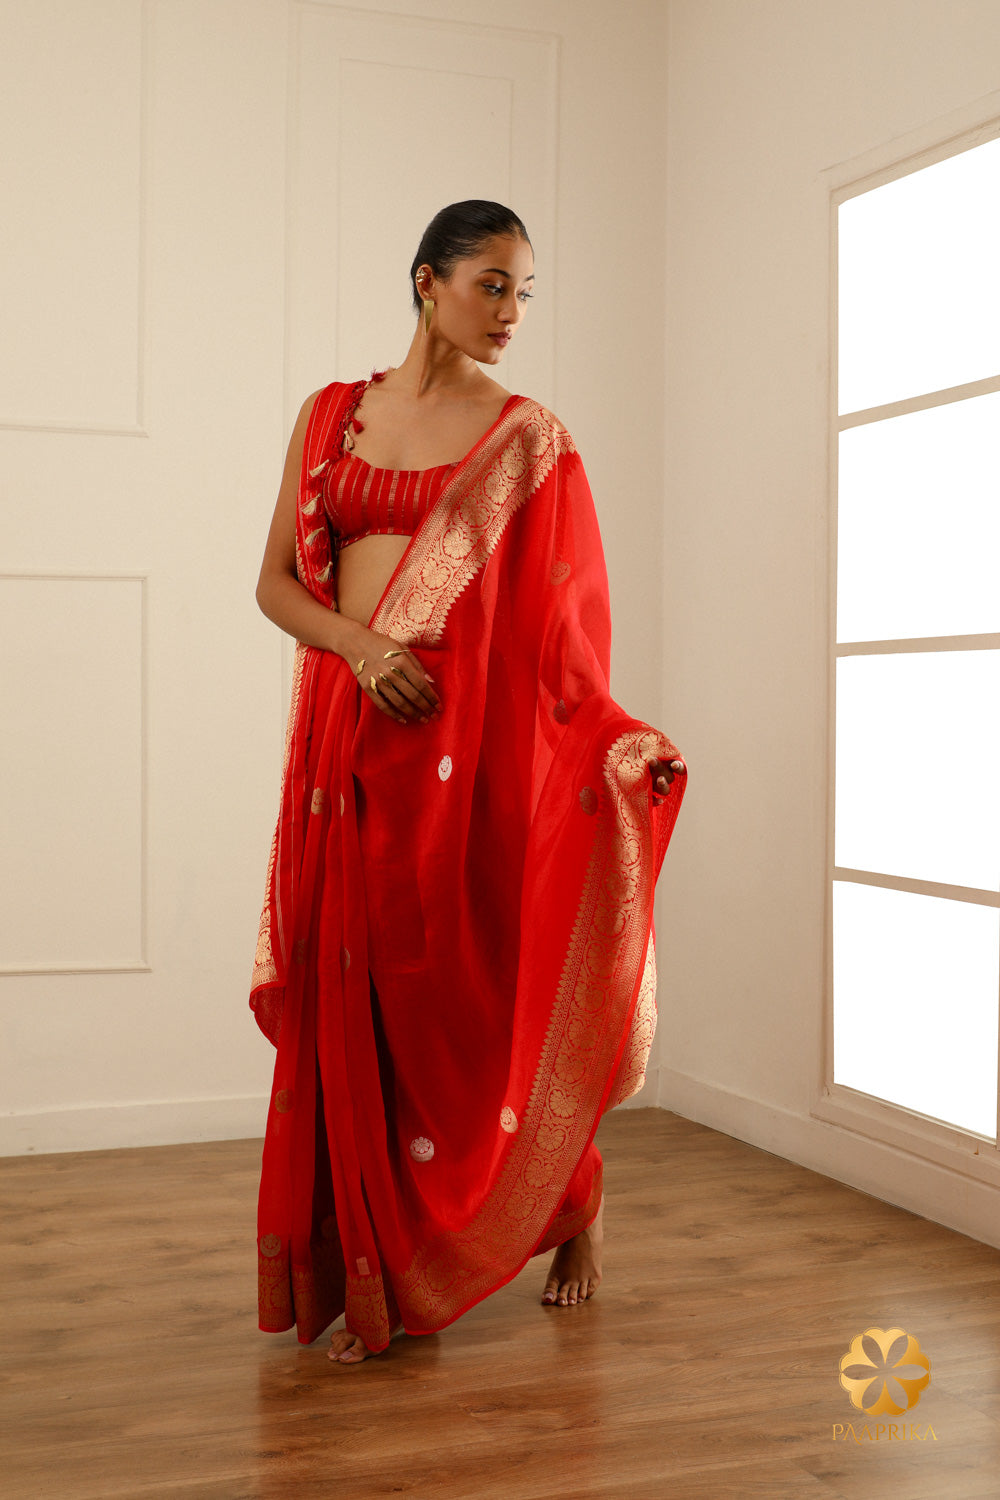 The saree paired with a contrasting blouse, creating a harmonious and fashionable ensemble.